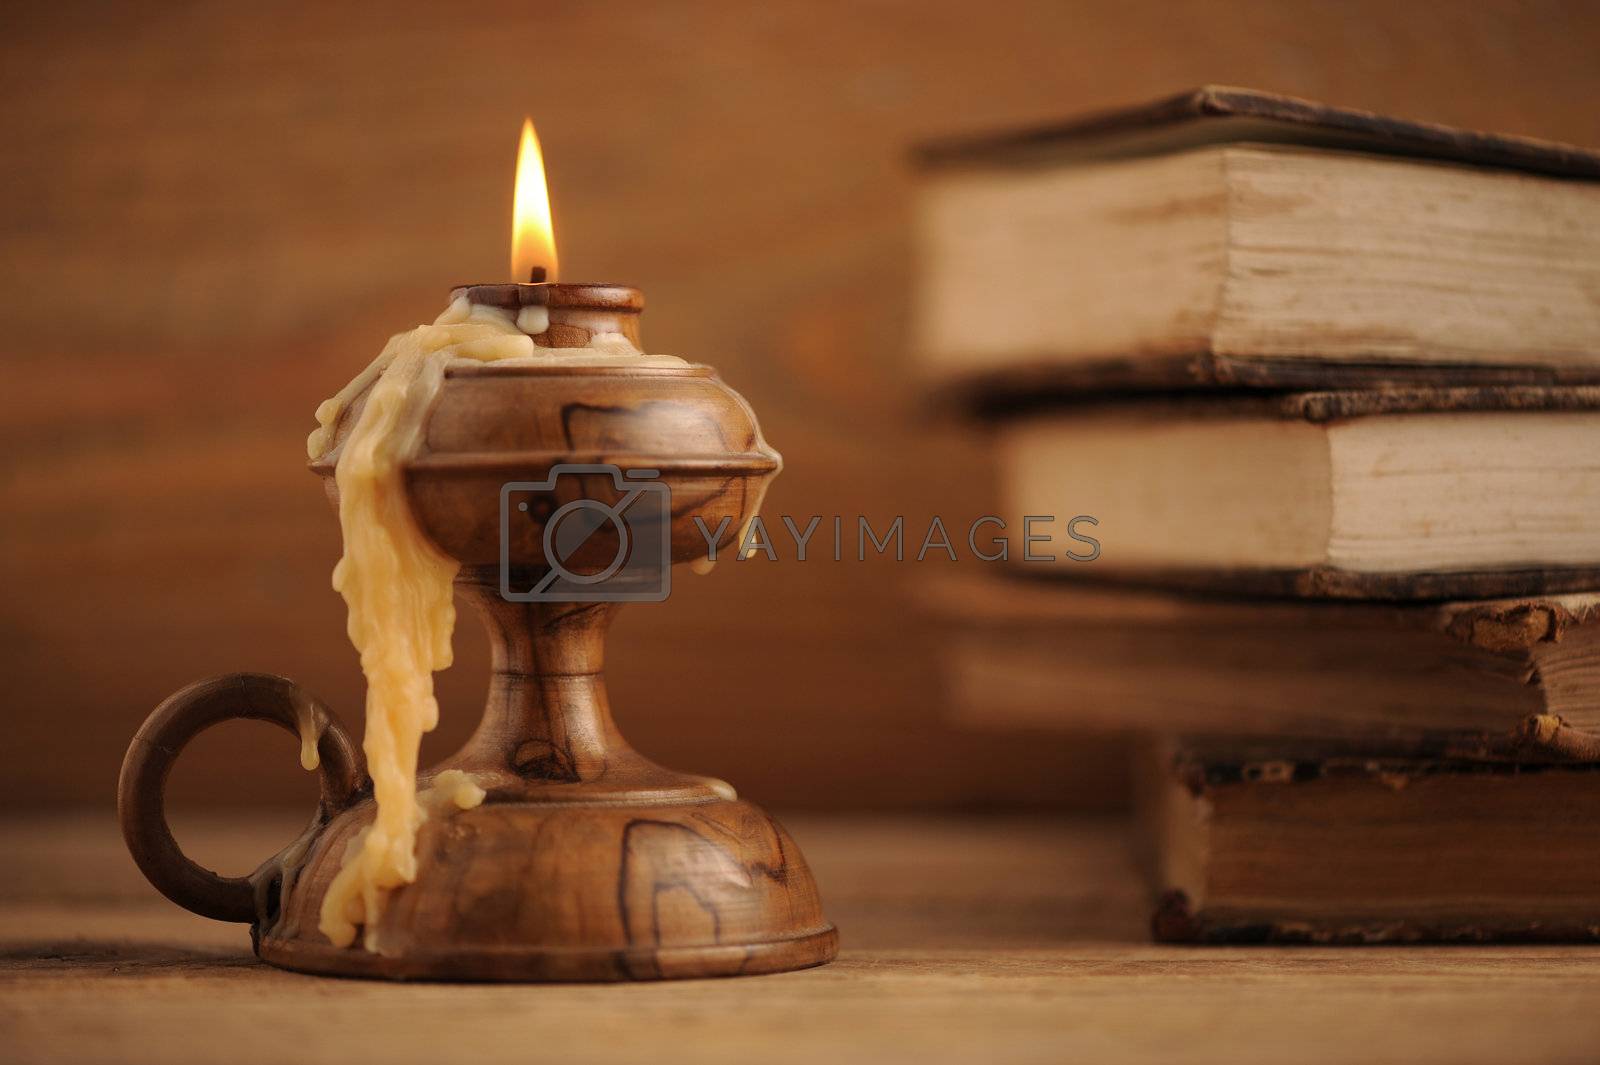 Royalty free image of old candle on a wooden table, old books in the background by stokkete